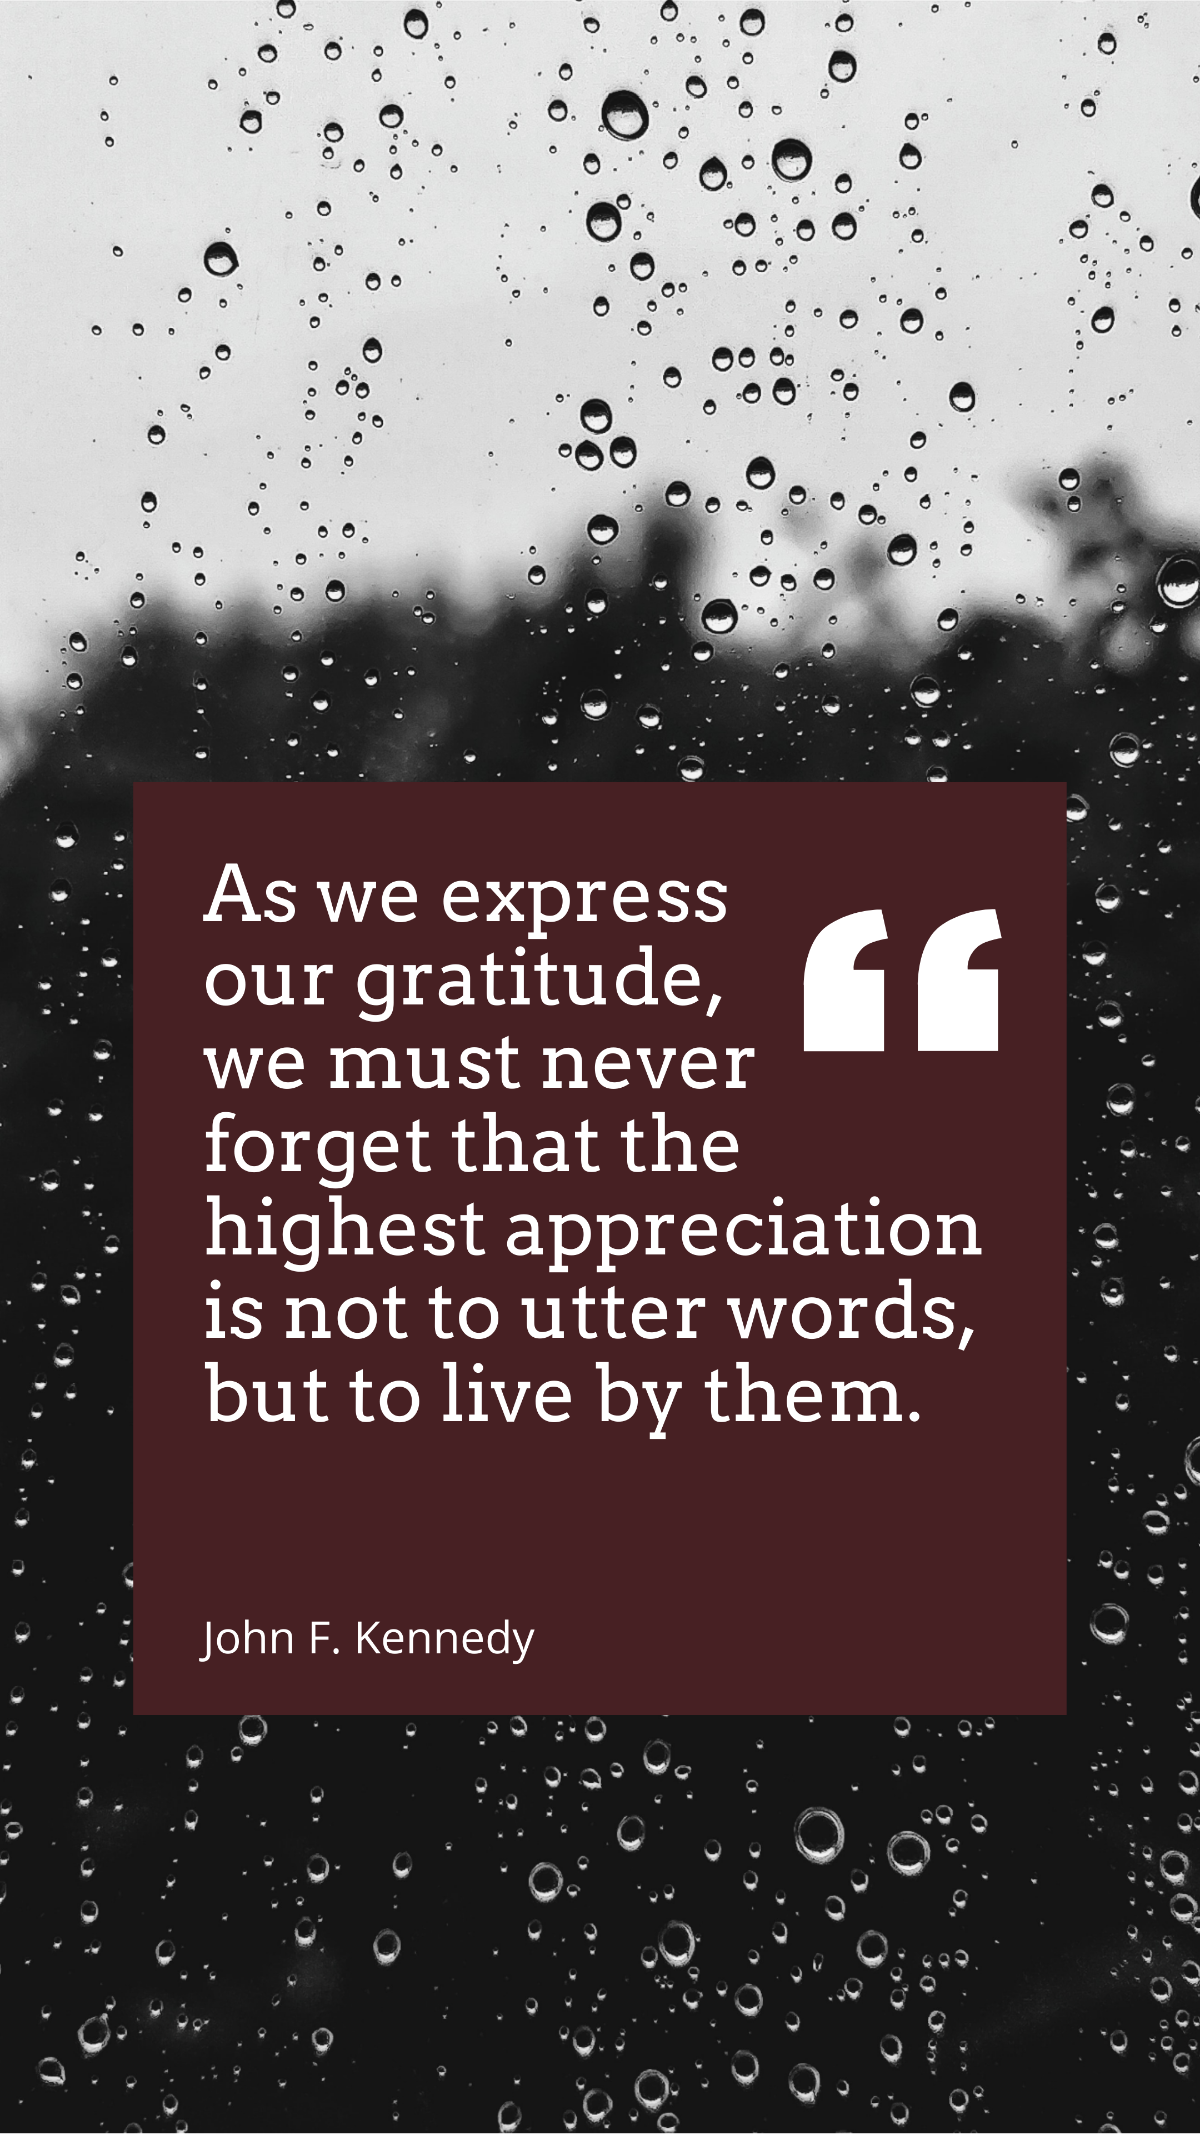 John F. Kennedy - As we express our gratitude, we must never forget that the highest appreciation is not to utter words, but to live by them. Template